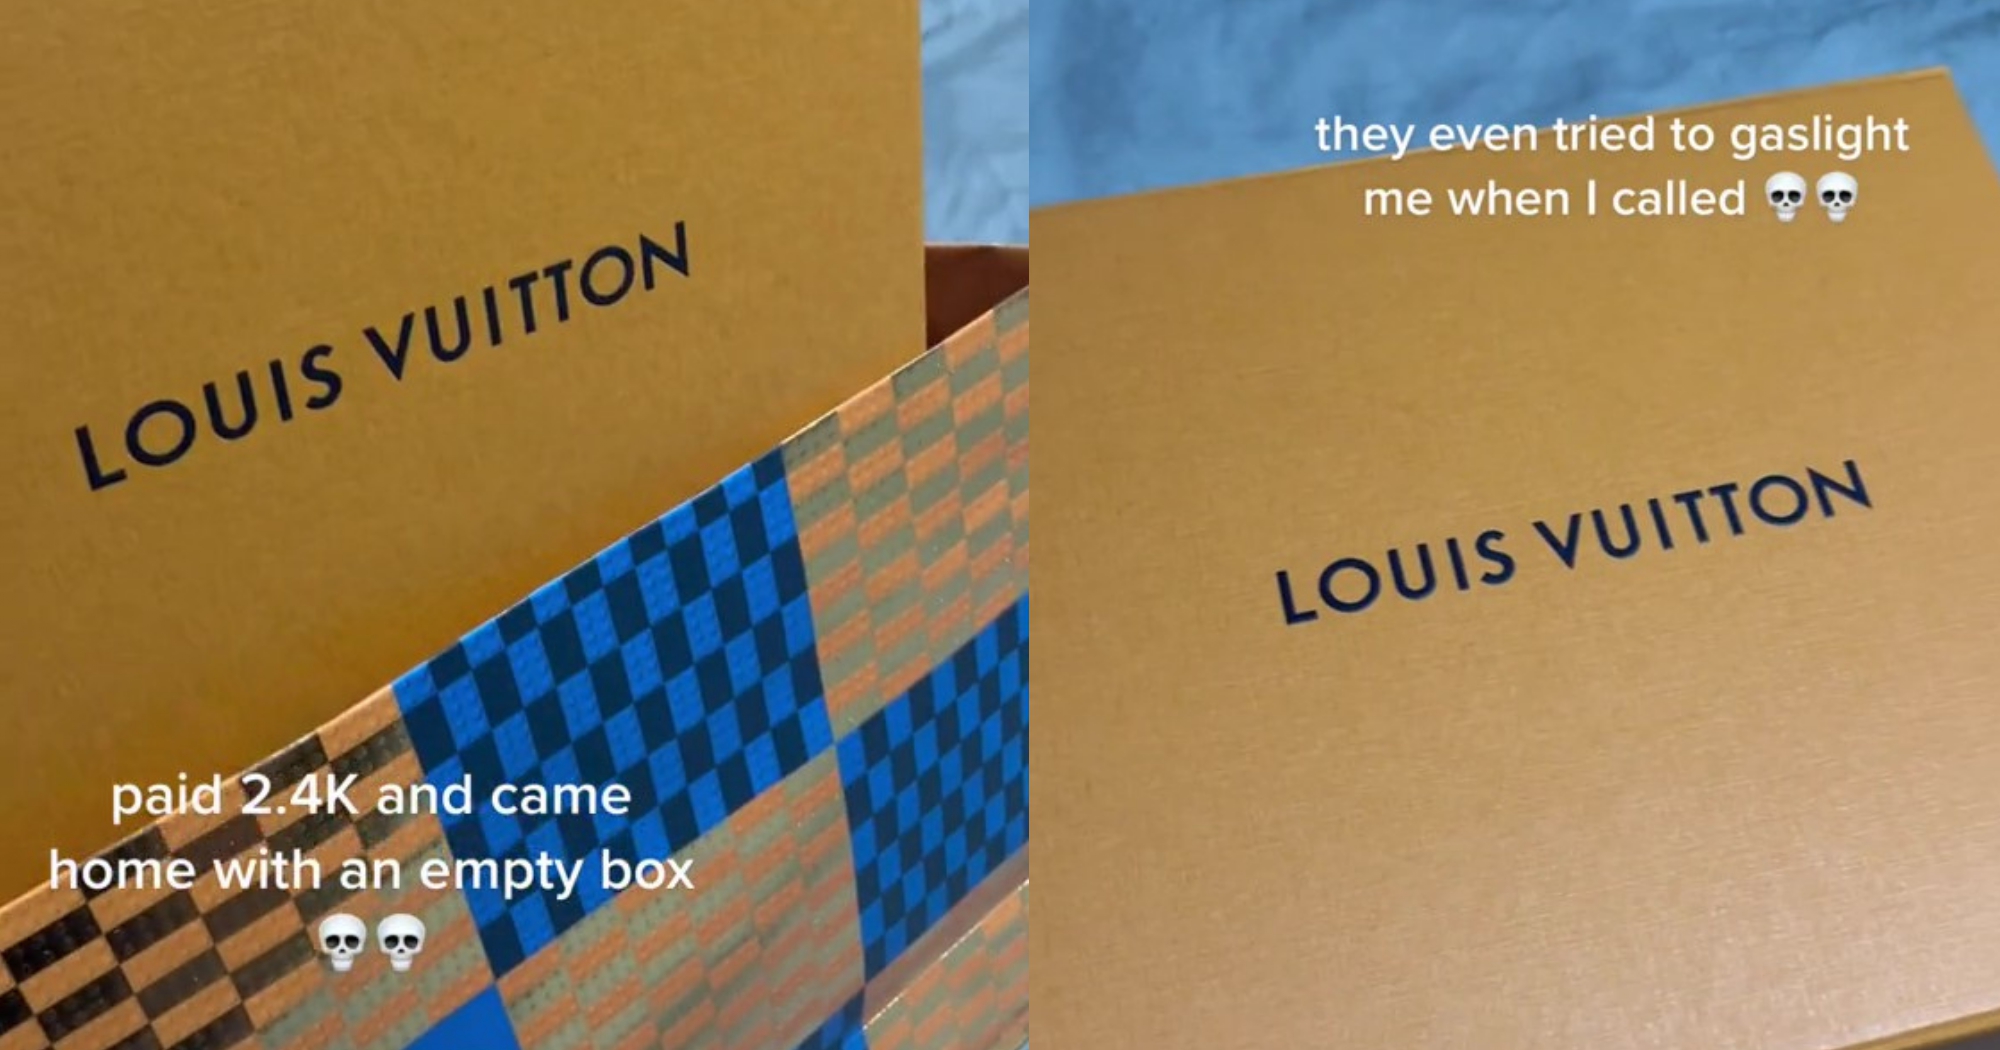 Singapore woman says she came home to empty Louis Vuitton box due